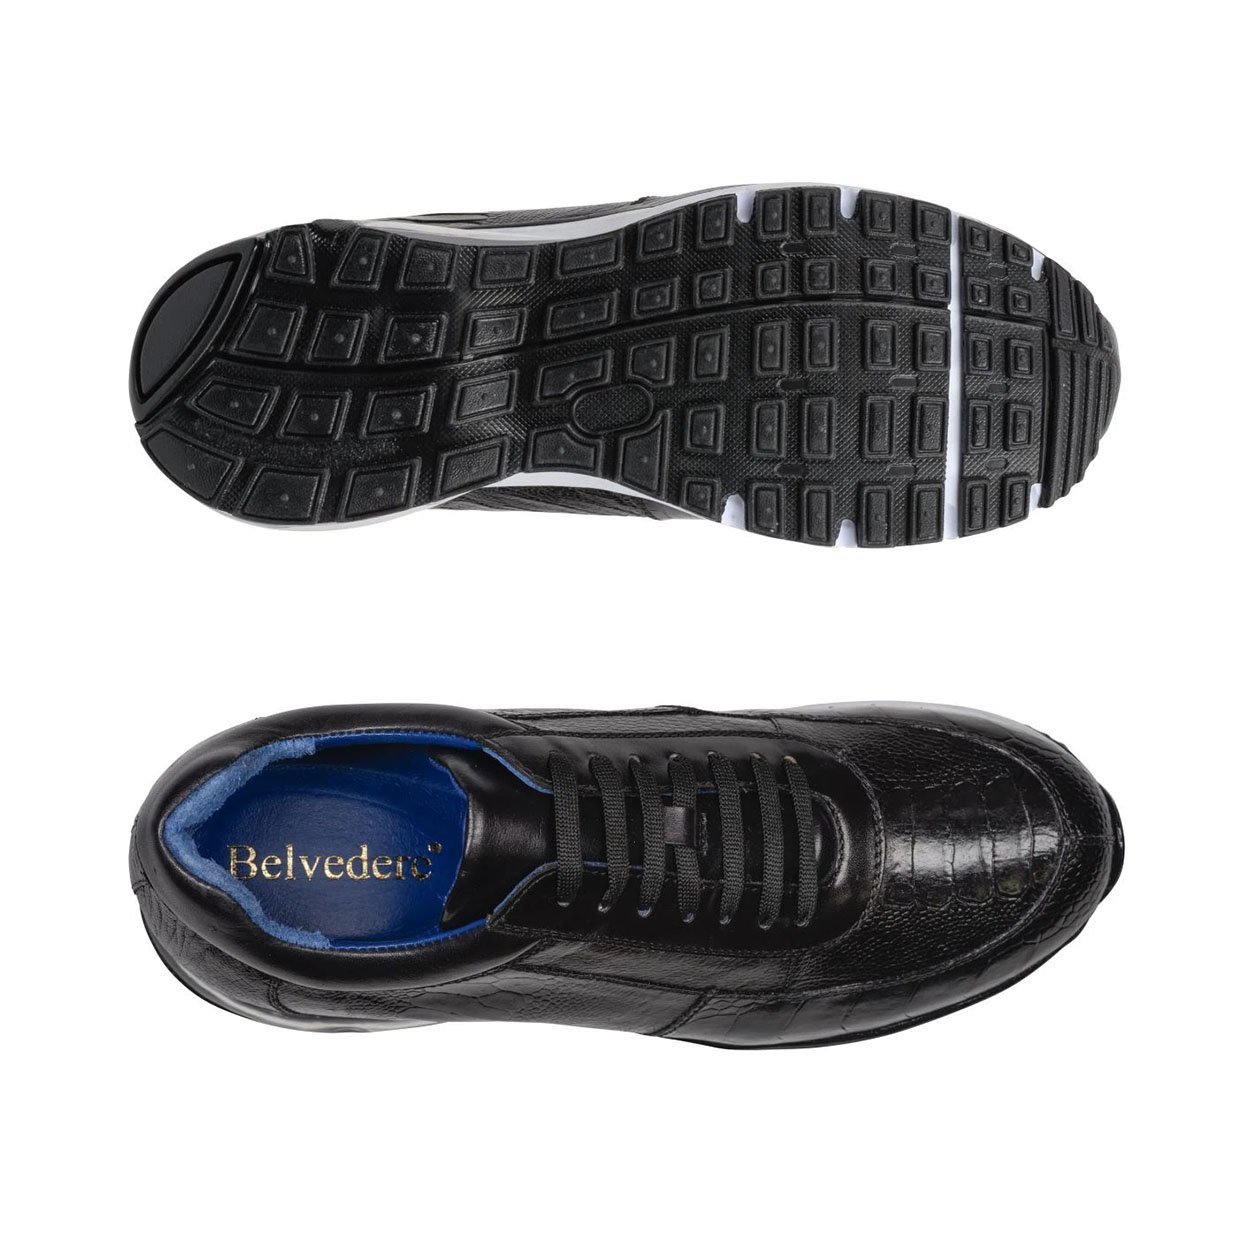 Belvedere Black Genuine Ostrich Leather Casual Sneakers